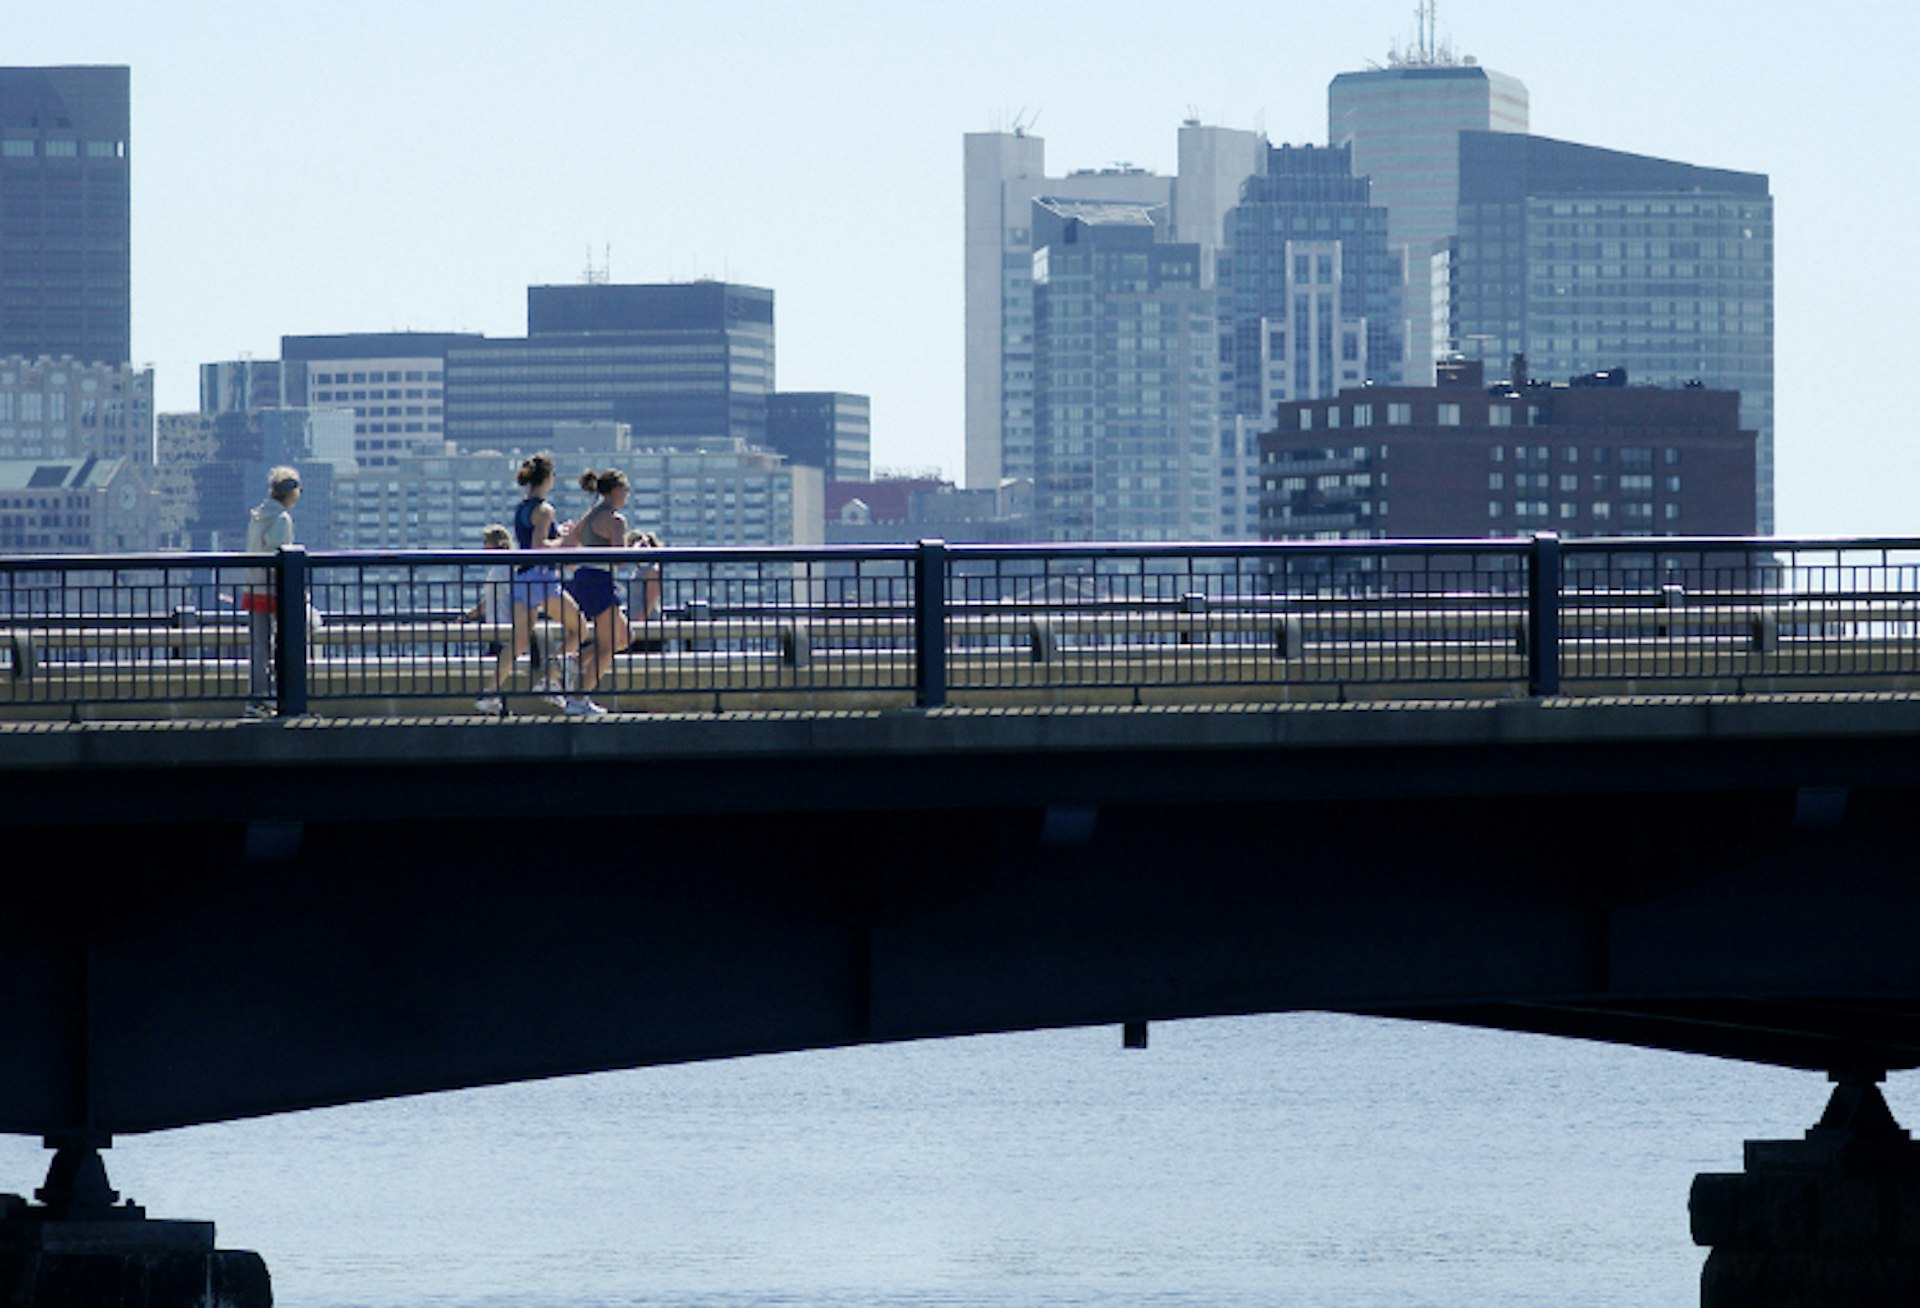 Running in Boston. Image by Samuli Siltanen / iStock / Getty Images Plus